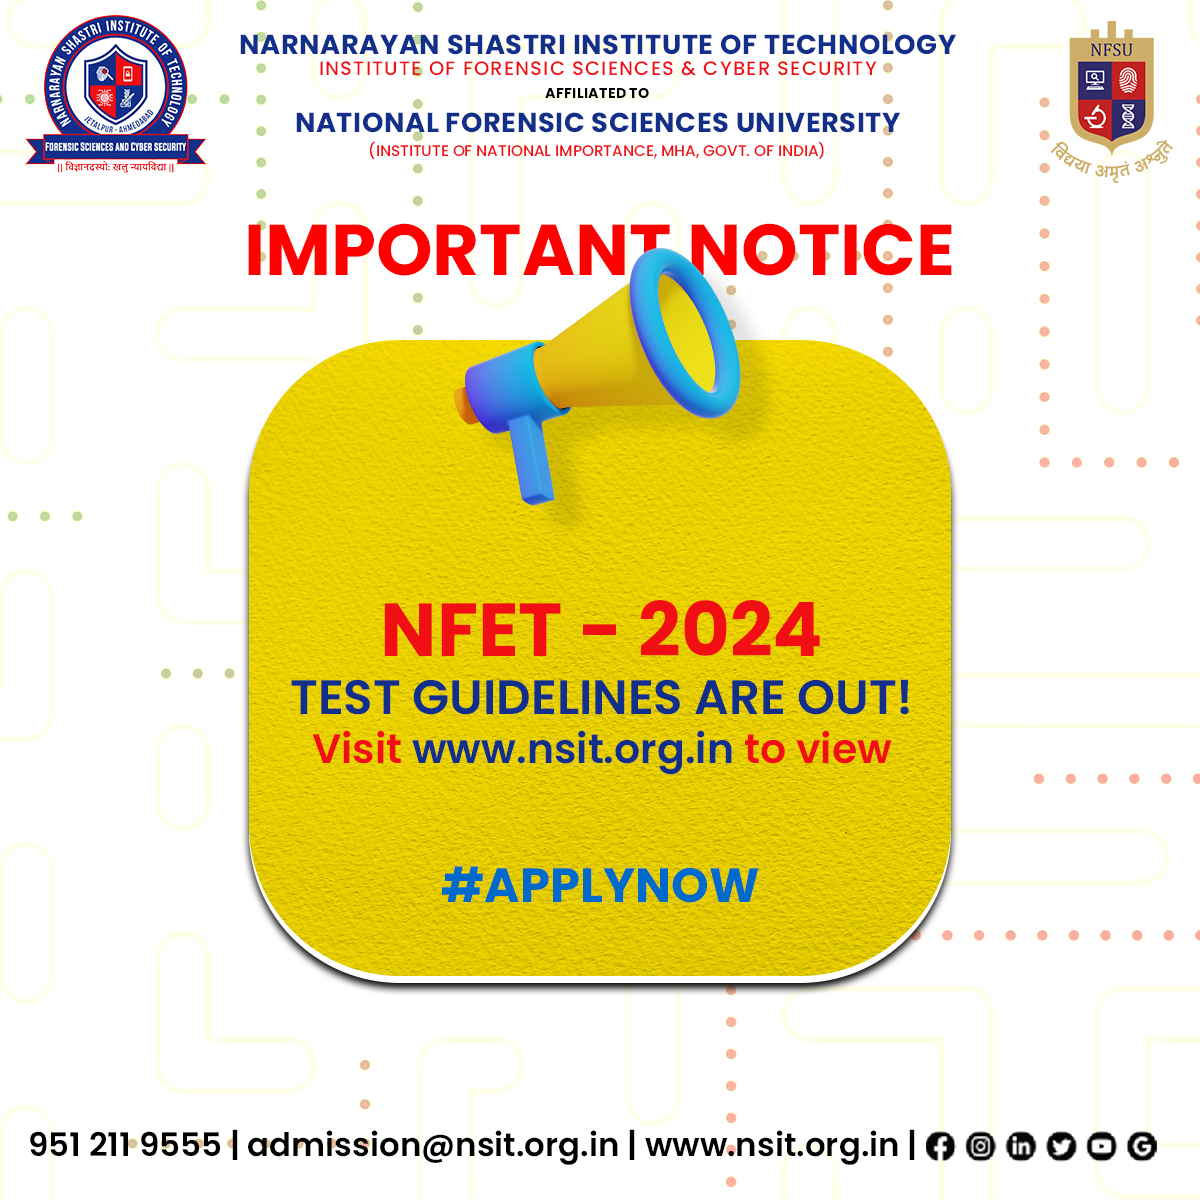 Important Notice Alert 🔔

NFET - 2024 Test Guidelines are Out! Visit nsit.org.in to view.

#nsit #nsitjetalpur #digitalforensics #cybersecurity #ForensicScience #forensics #ahmedabad #AdmissionOpen #ifscs #security #technology #cybercrime #privacy #college #student